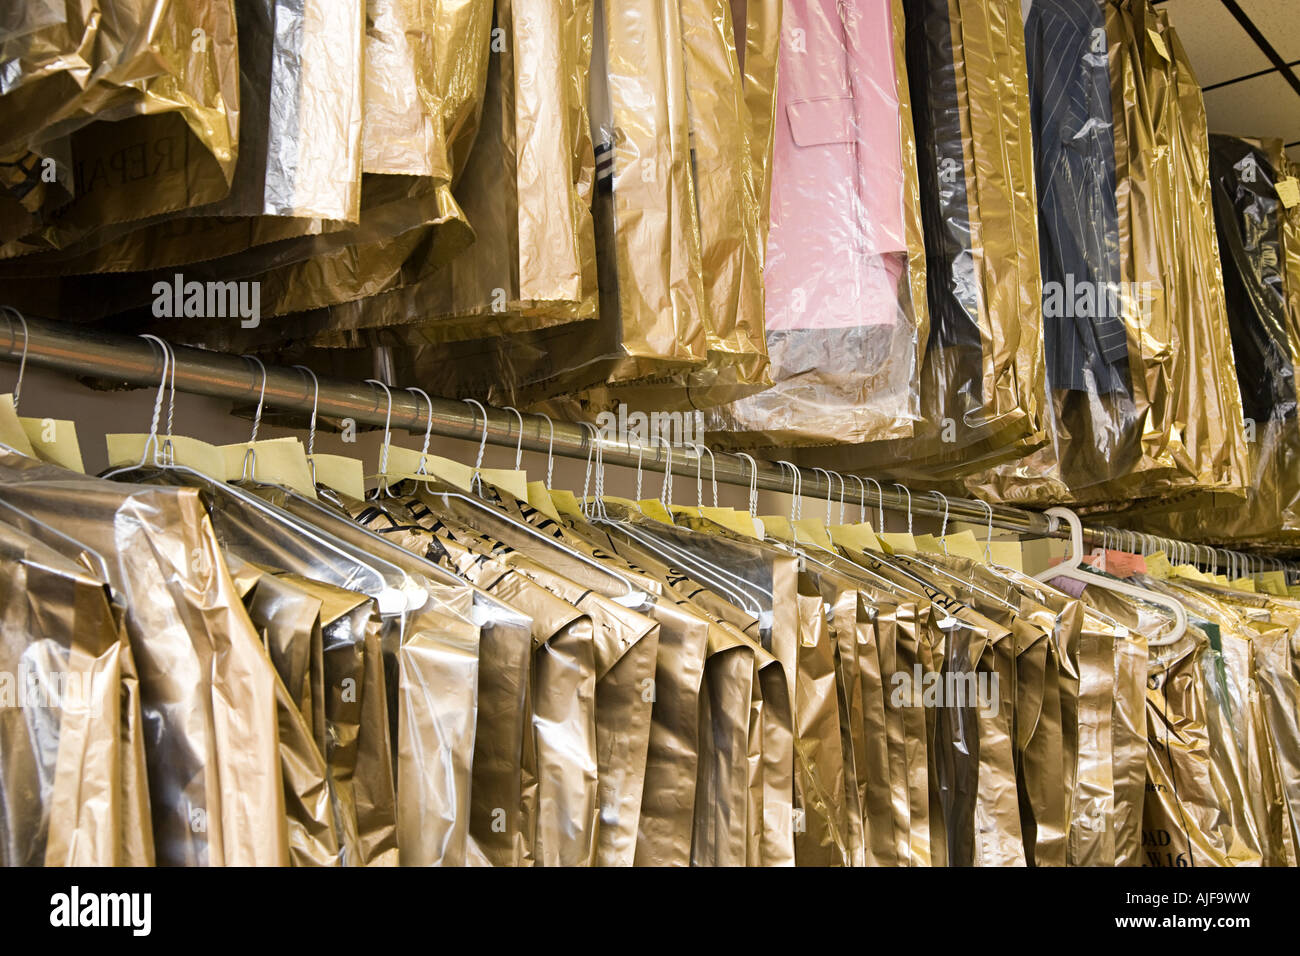 Dry cleaning hanging on a clothes rail Stock Photo